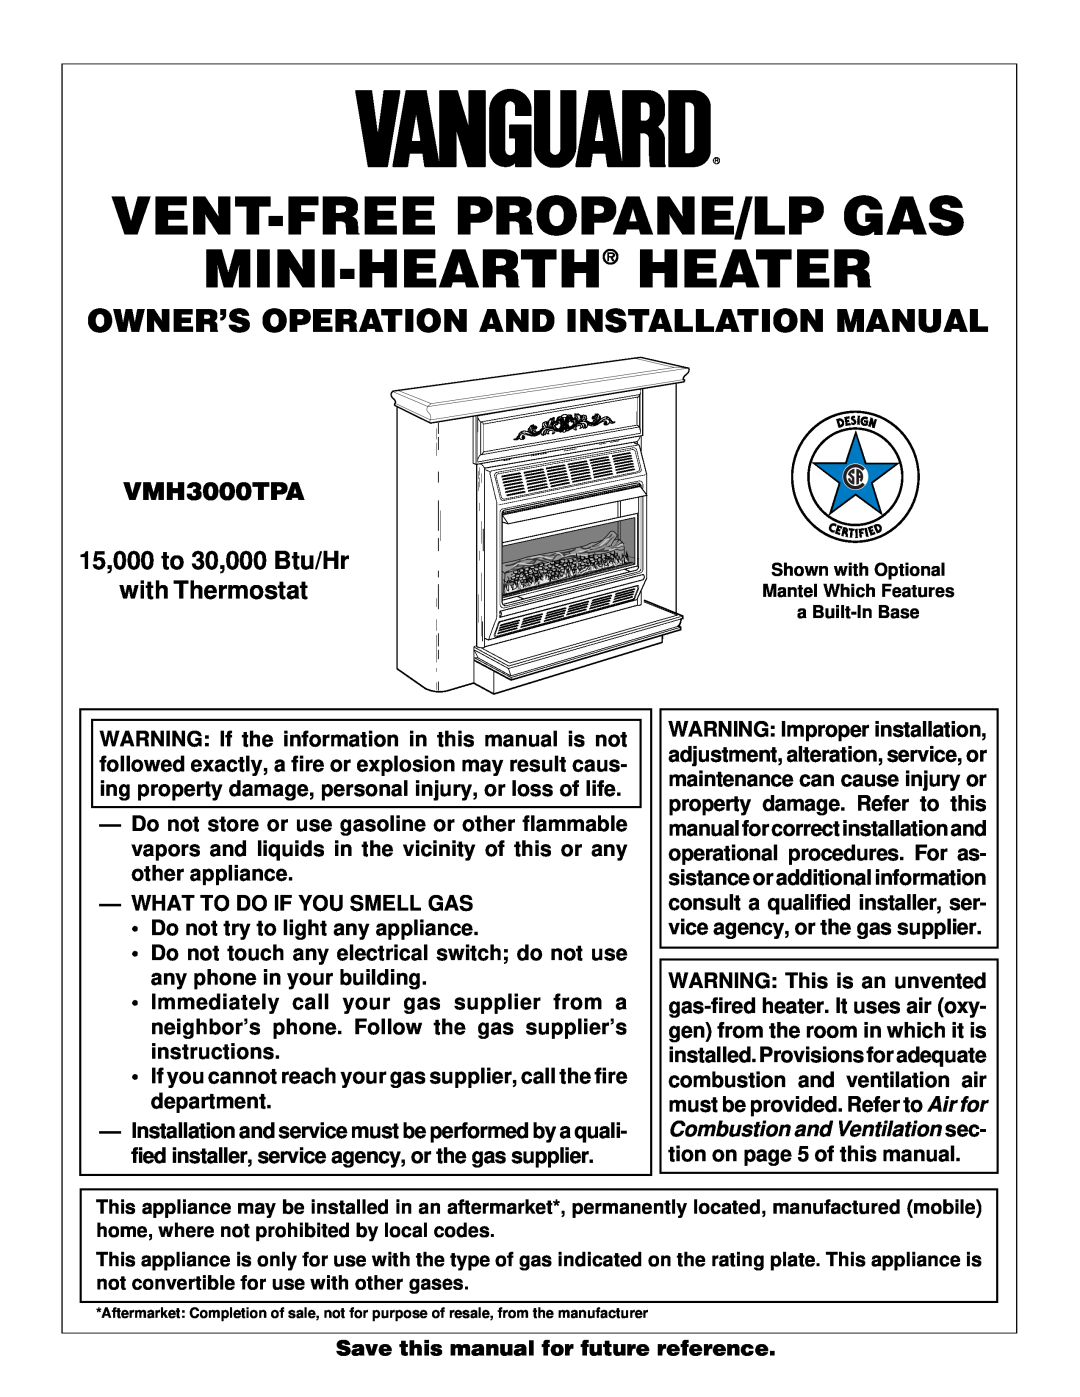 Vanguard Heating VMH3000TPA installation manual Owner’S Operation And Installation Manual, What To Do If You Smell Gas 